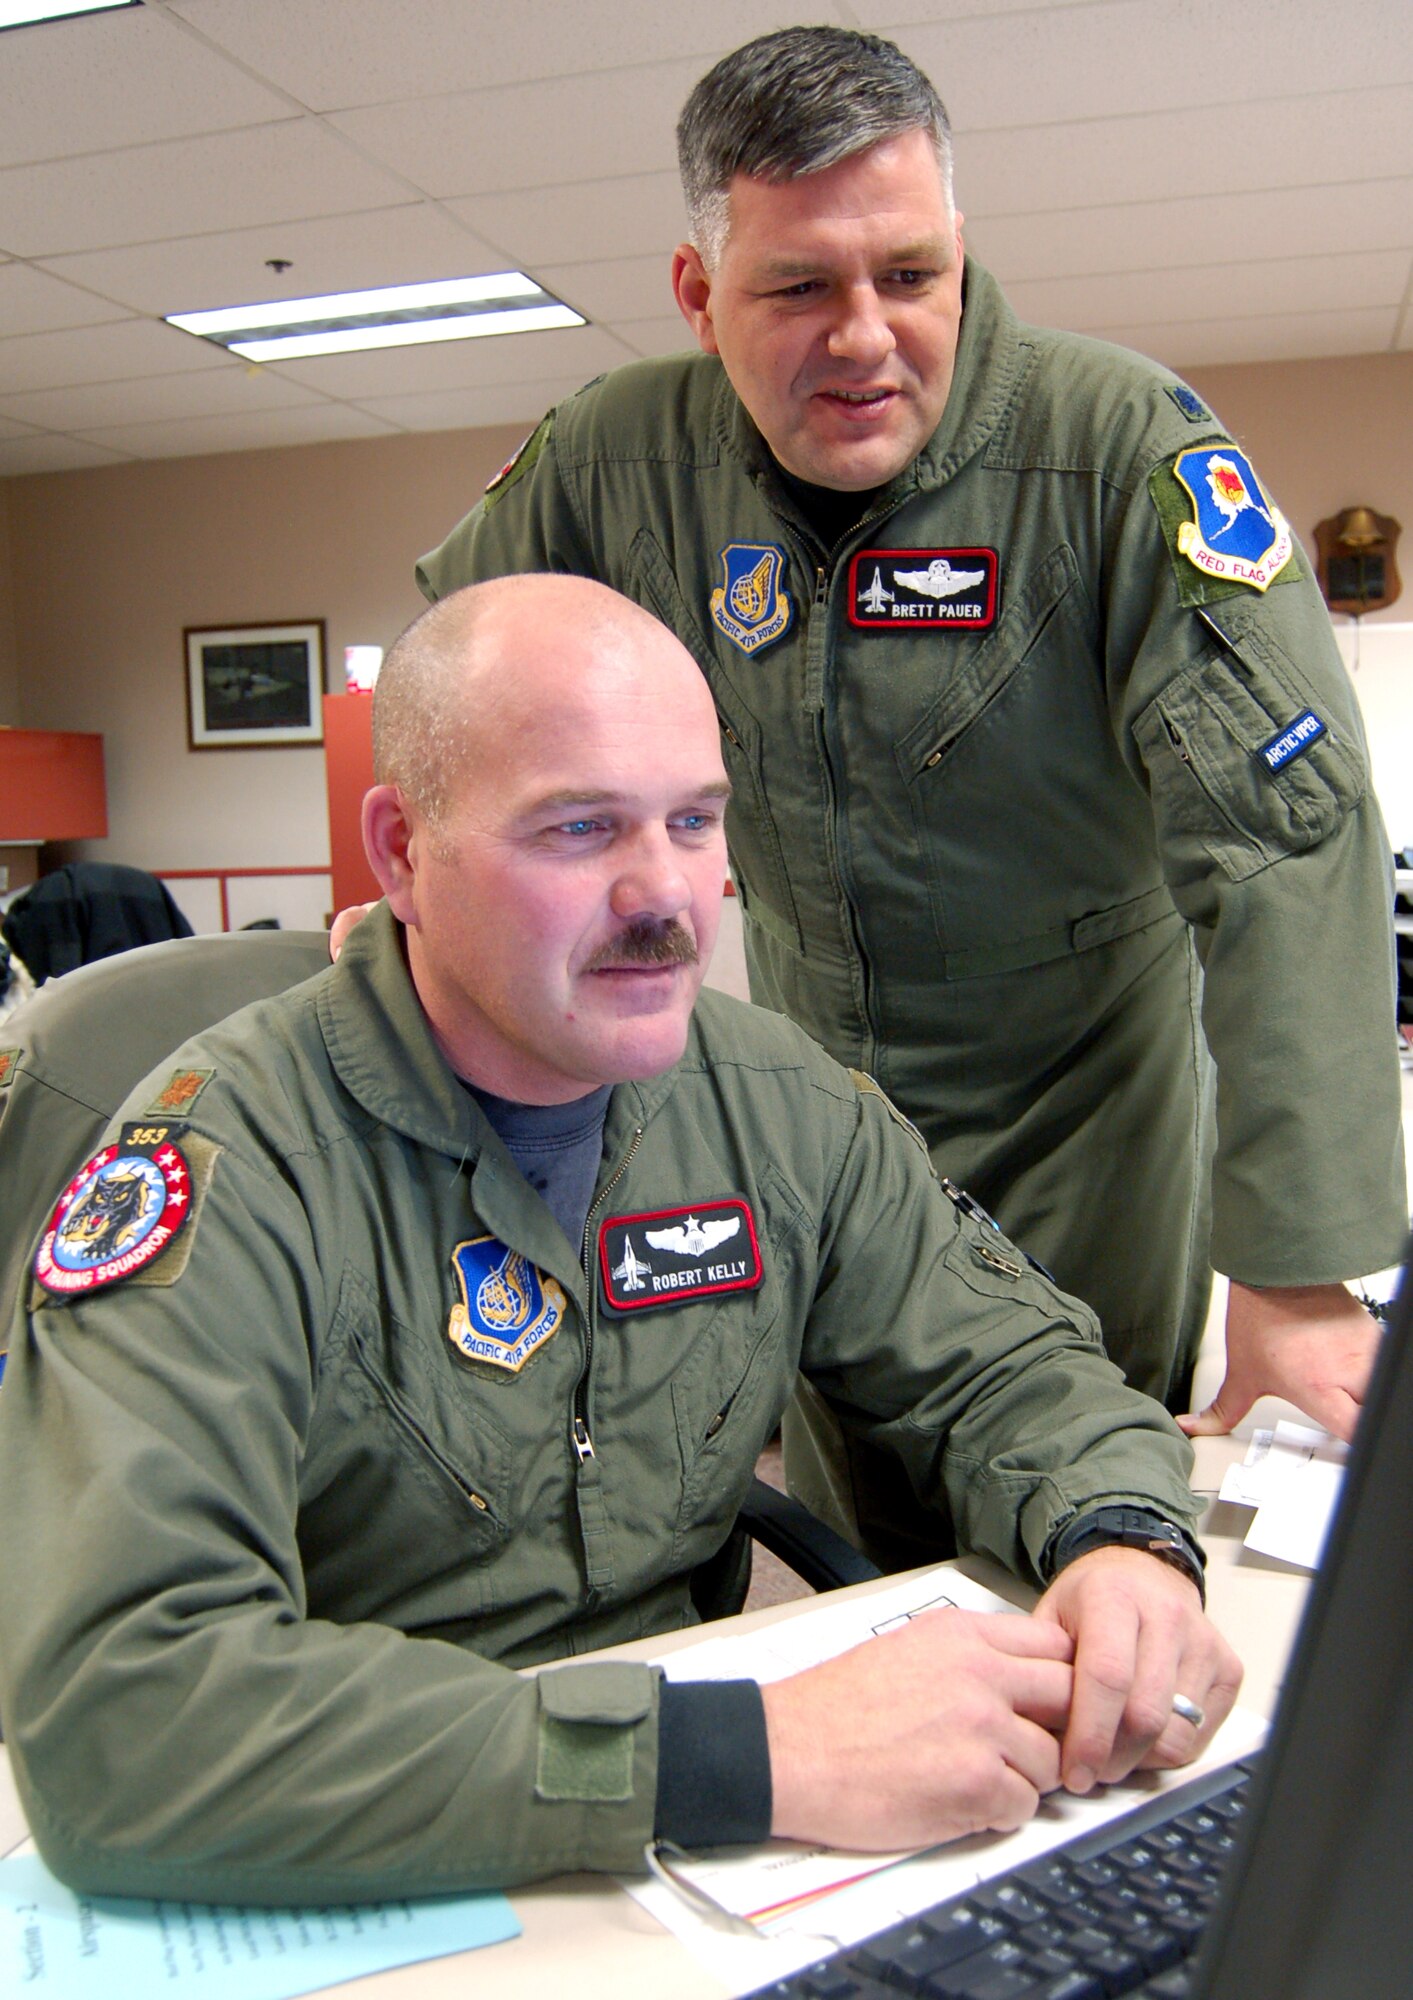 Maj. Robert Kelly (front) goes over operational mission plans for an upcoming Red Flag-Alaska exercise with Lt. Col. Brett Pauer, director of operations at the 353rd Combat Training Squadron at Eielson Air Force Base, Alaska. Eielson's exercise role is transitioning from Cope Thunder exercises to Red Flag-Alaska. Major Kelly is a weapons officer at the 353rd CTS and soon will be an aggressor pilot for the Red Forces during Red Flag-Alaska exercises. (U.S. Air Force photo/Staff Sgt. Matthew Rosine) 